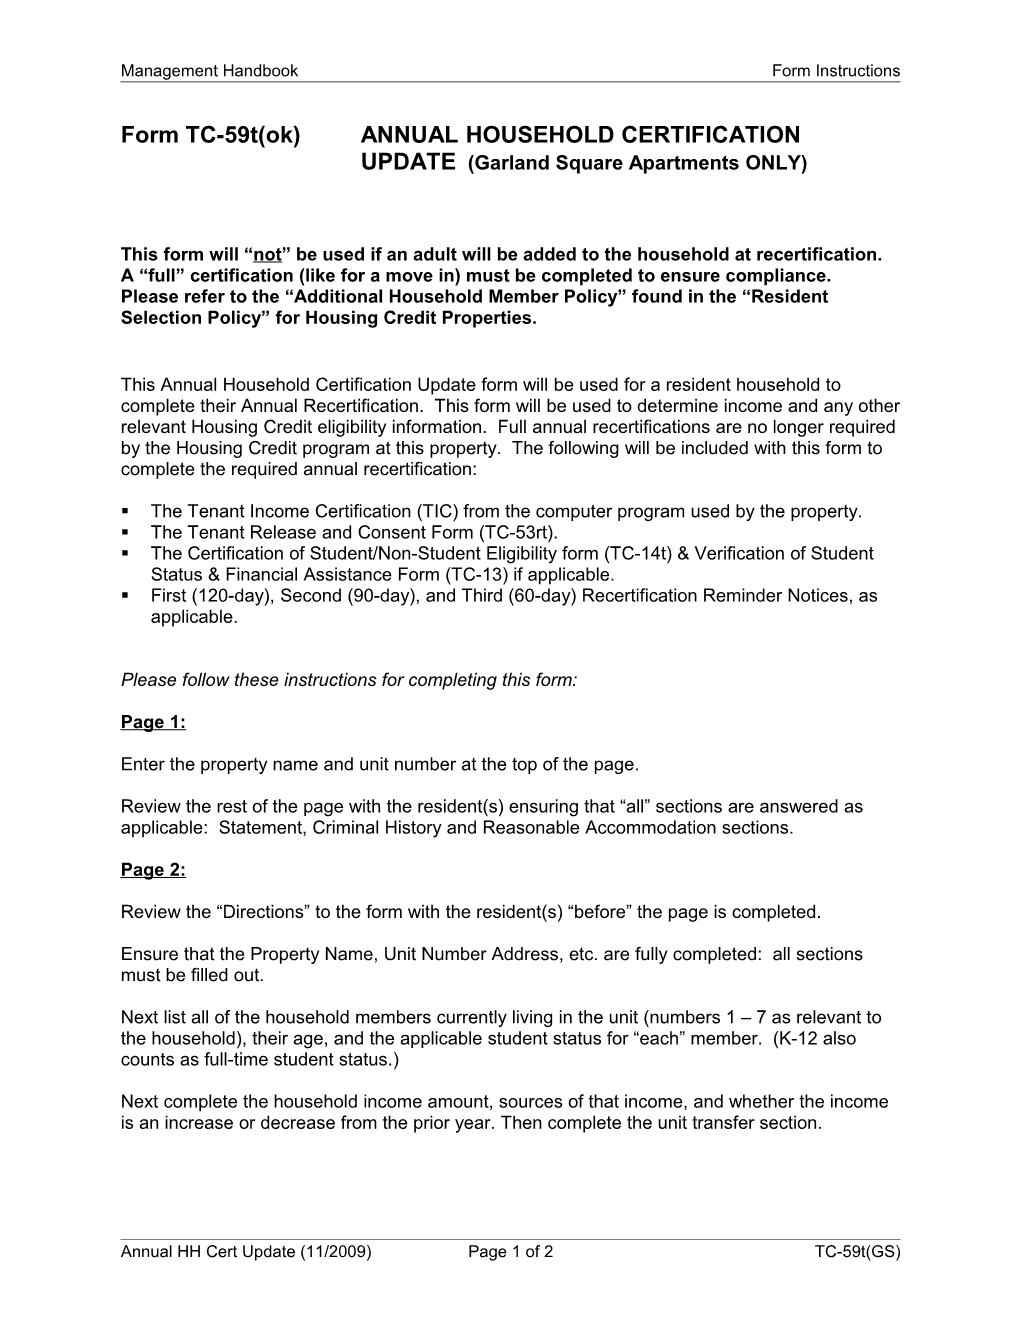 Form TC-59T(Ok)ANNUAL HOUSEHOLD CERTIFICATION UPDATE (Garland Square Apartments ONLY)